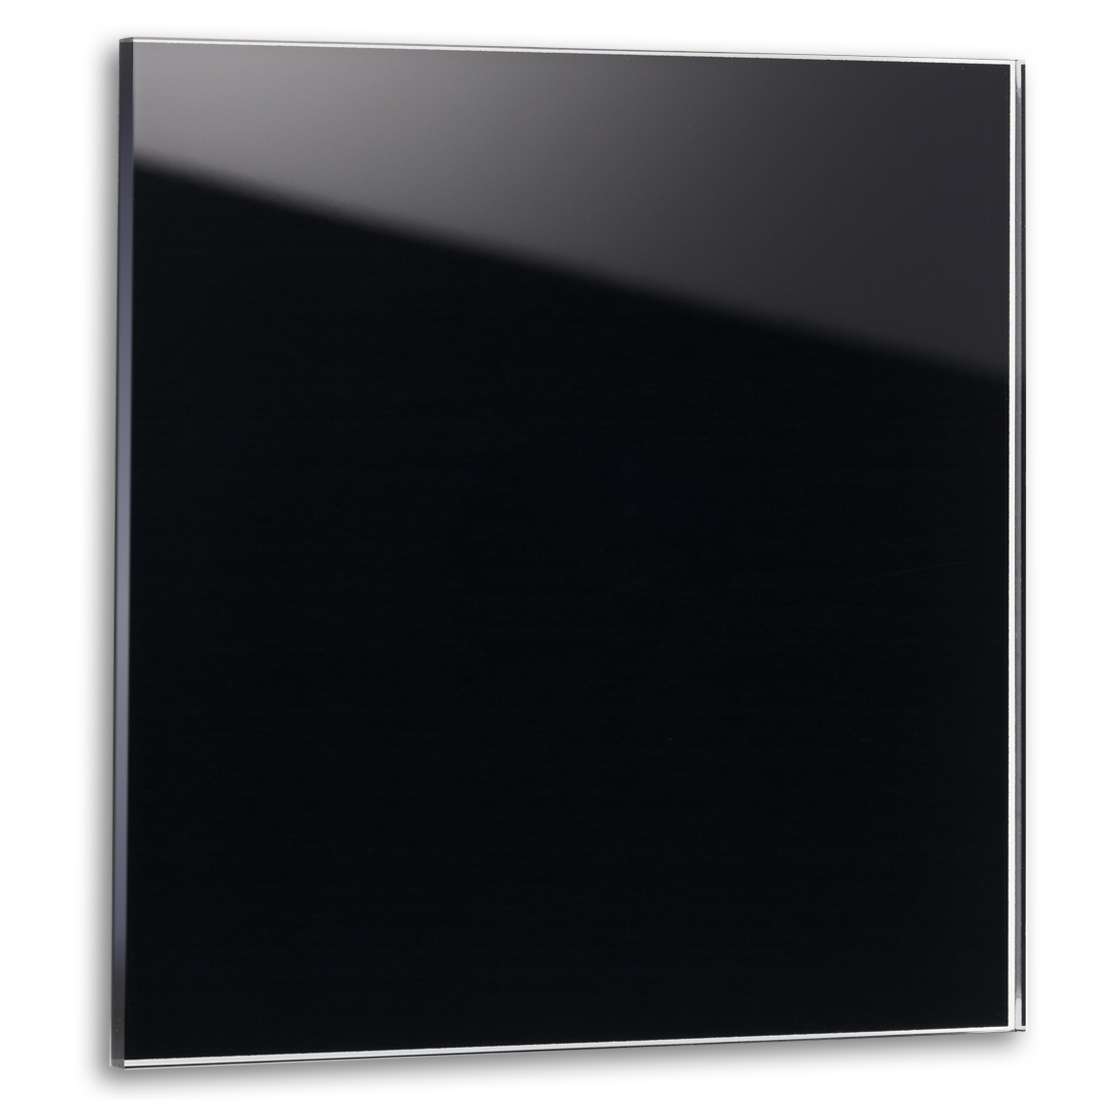 FreeTouch front panel. Black glass optic. 1-fold. 